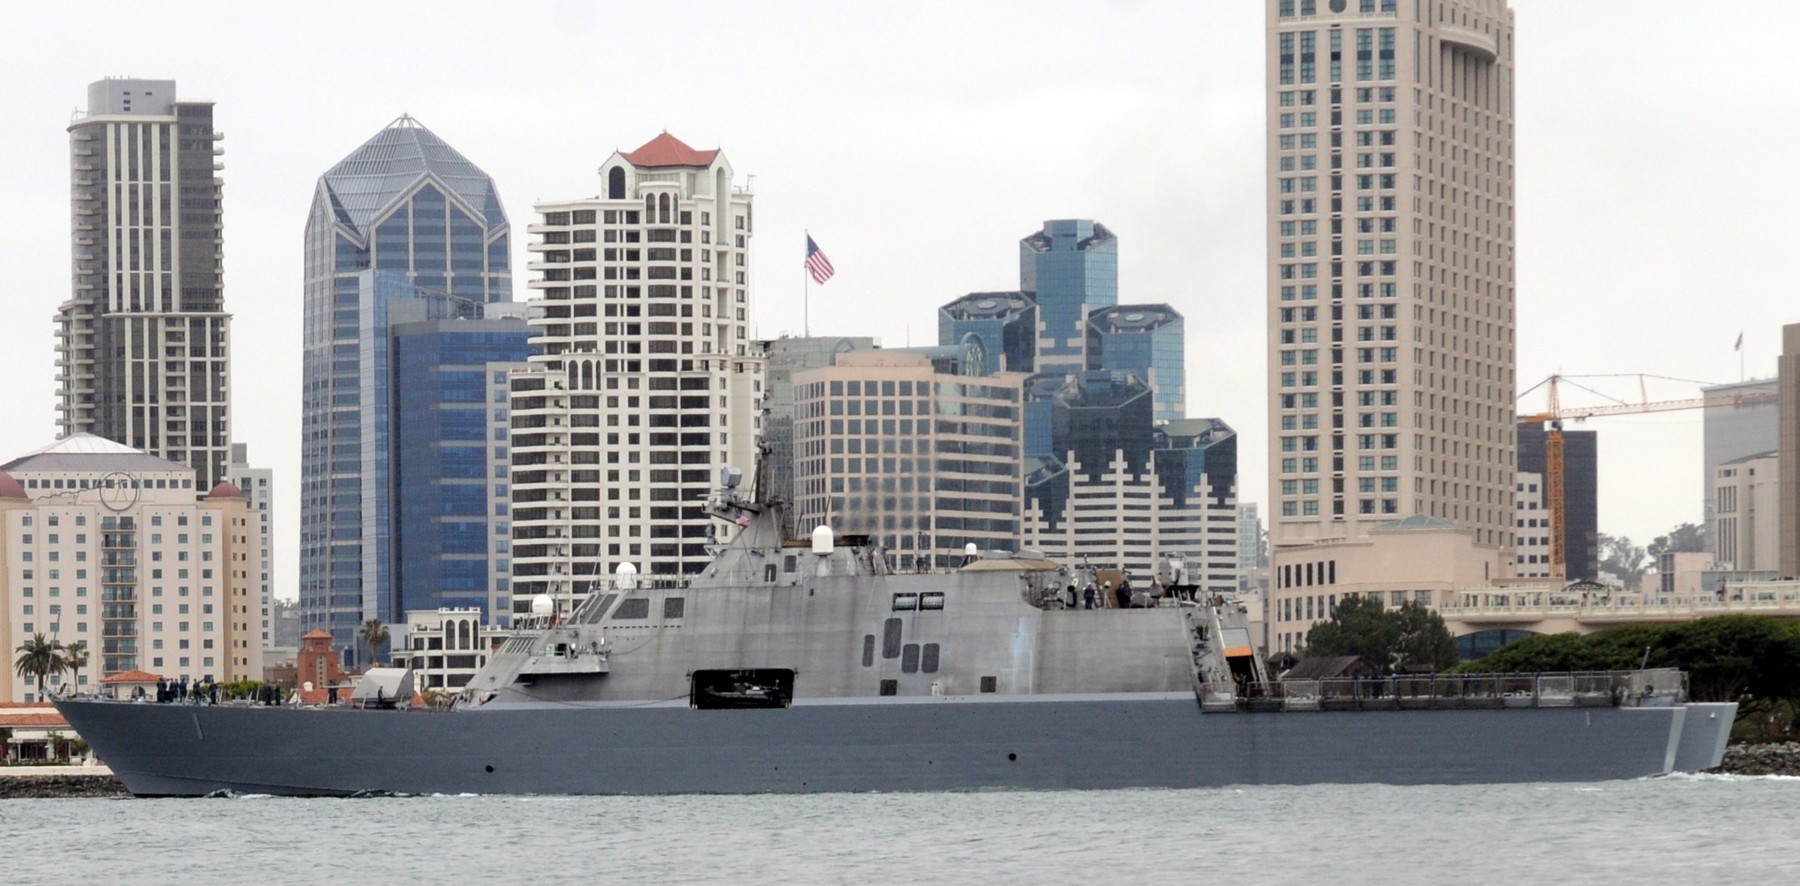 lcs-1 uss freedom class littoral combat ship us navy 83 san diego